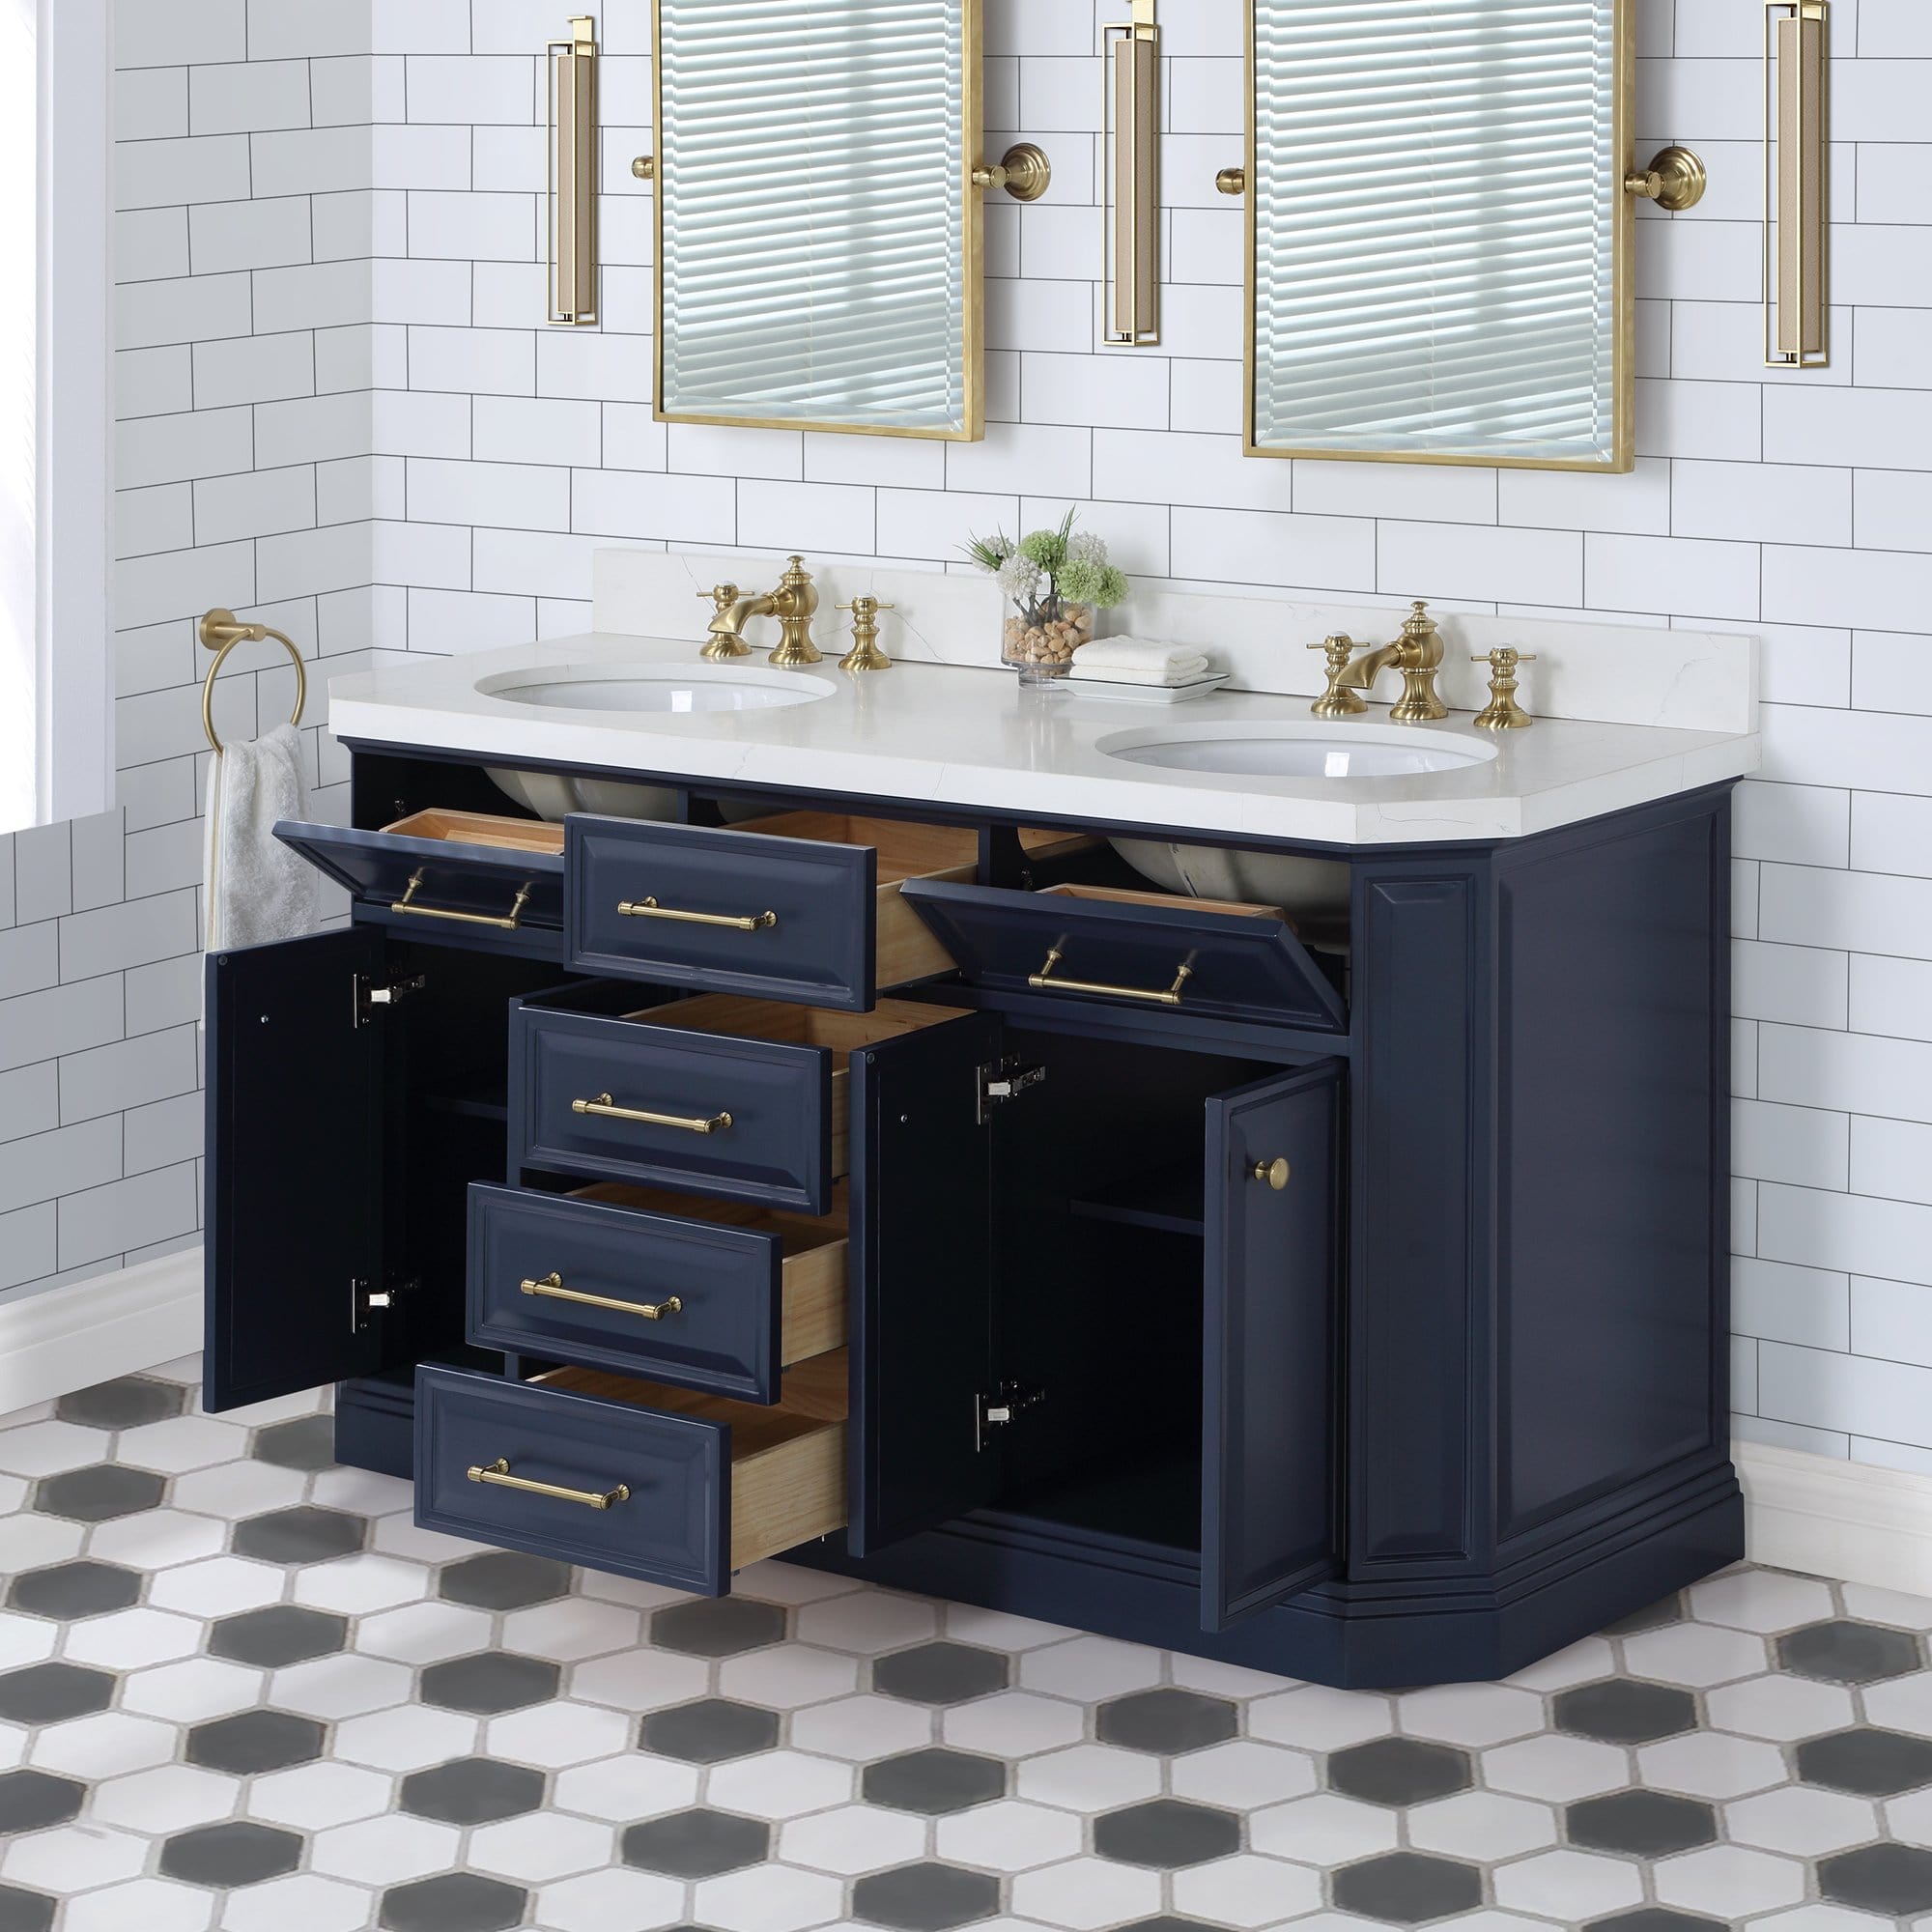 Water Creation Palace 60 In. Double Sink White Quartz Countertop Vanity in Monarch Blue with Waterfall Faucets - Molaix732030765009Bathroom vanityPA60QZ06MB-000FX1306